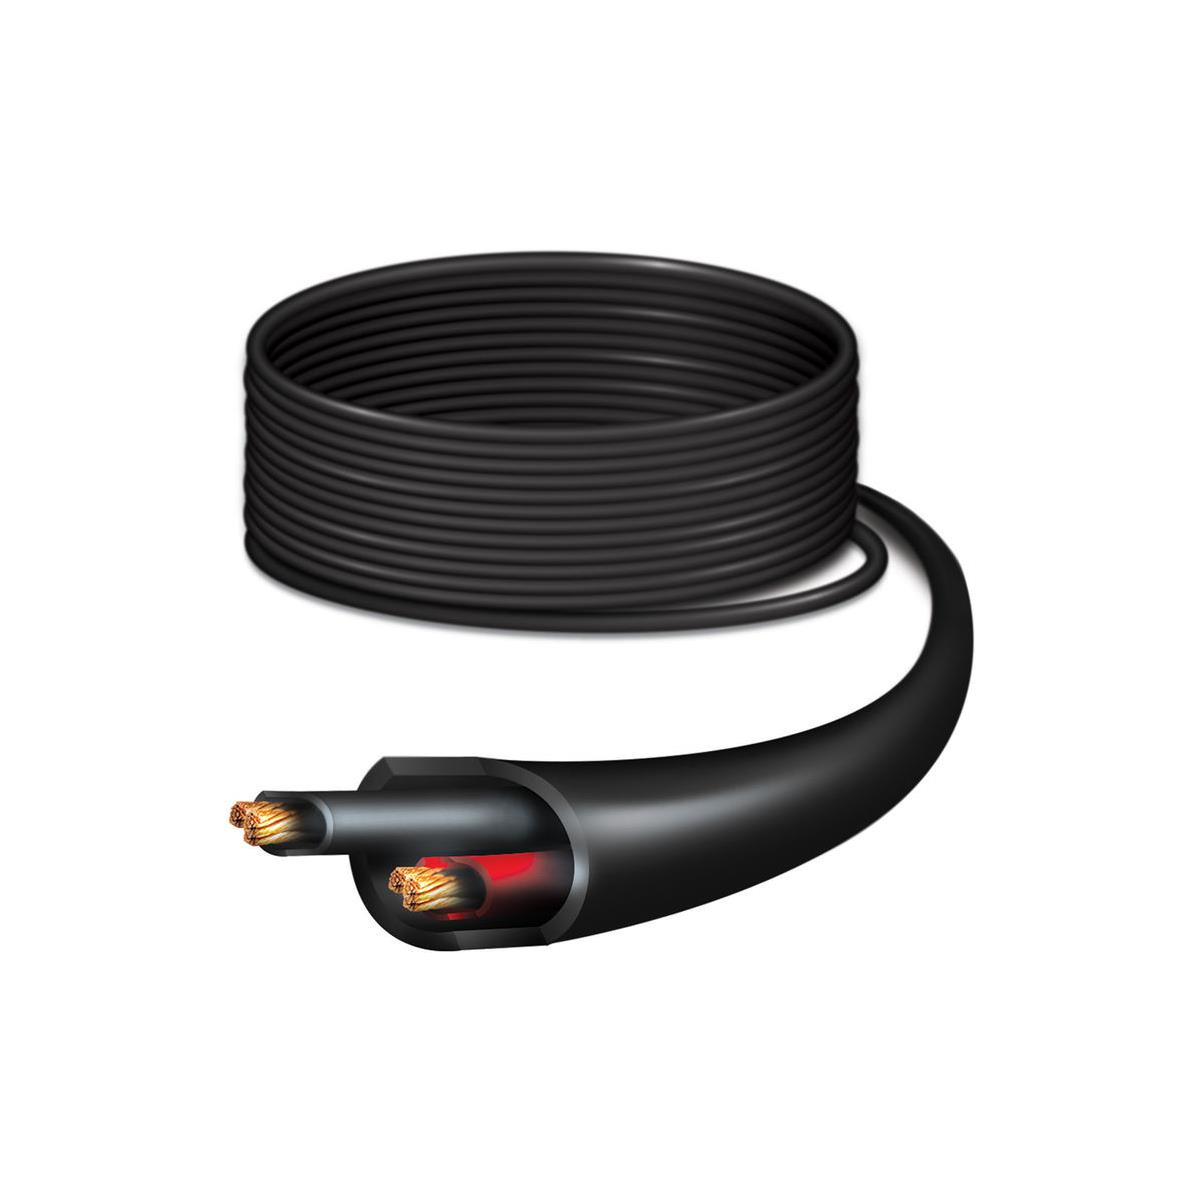 Image of Ubiquiti Networks 1000' PC-12 Outdoor 12 AWG DC Power Cable